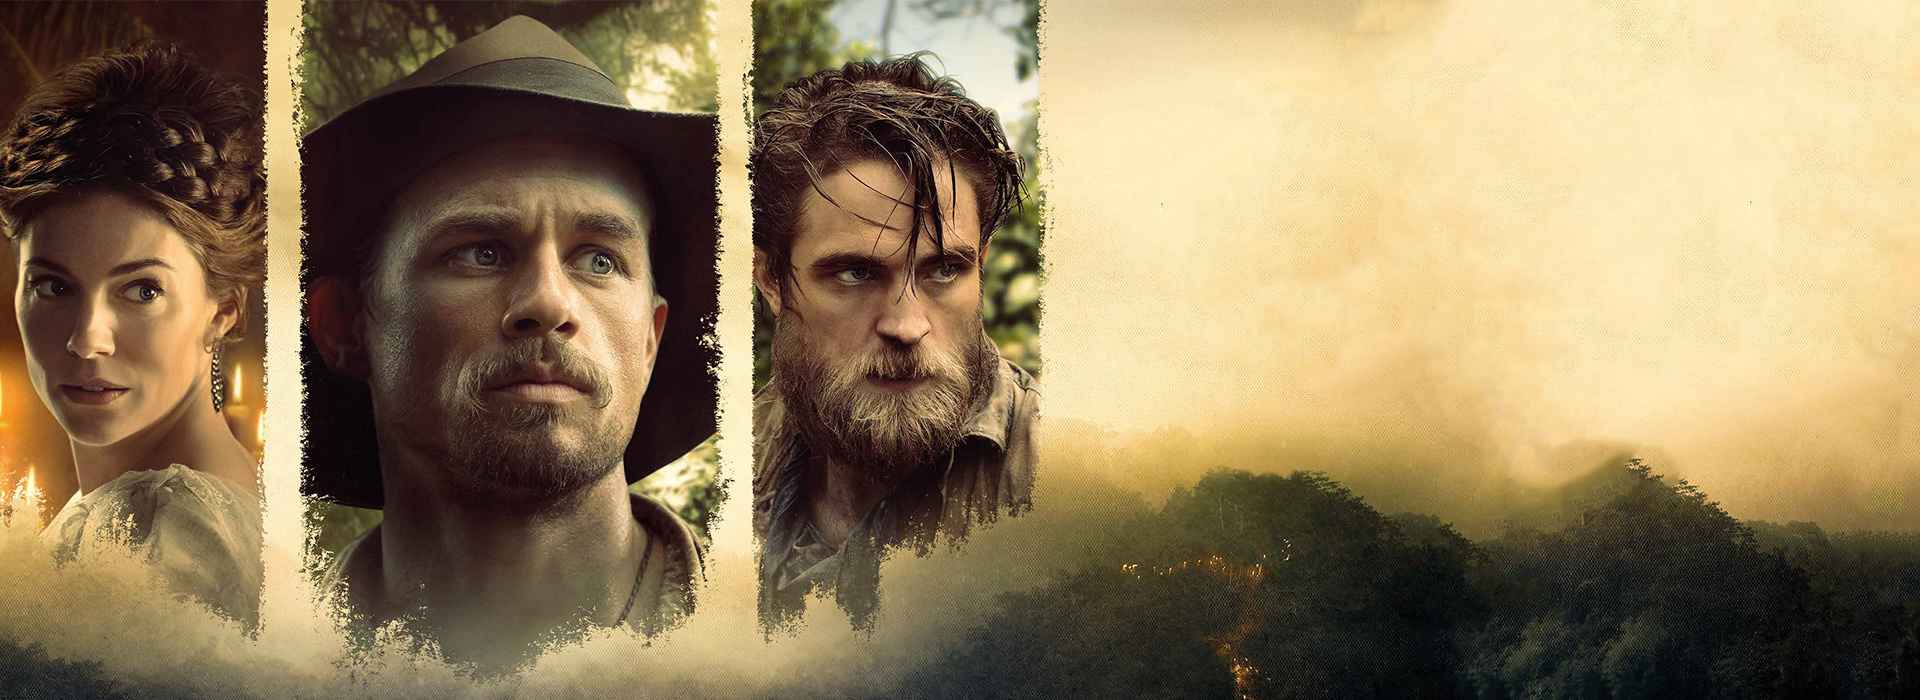 Movie poster The Lost City of Z